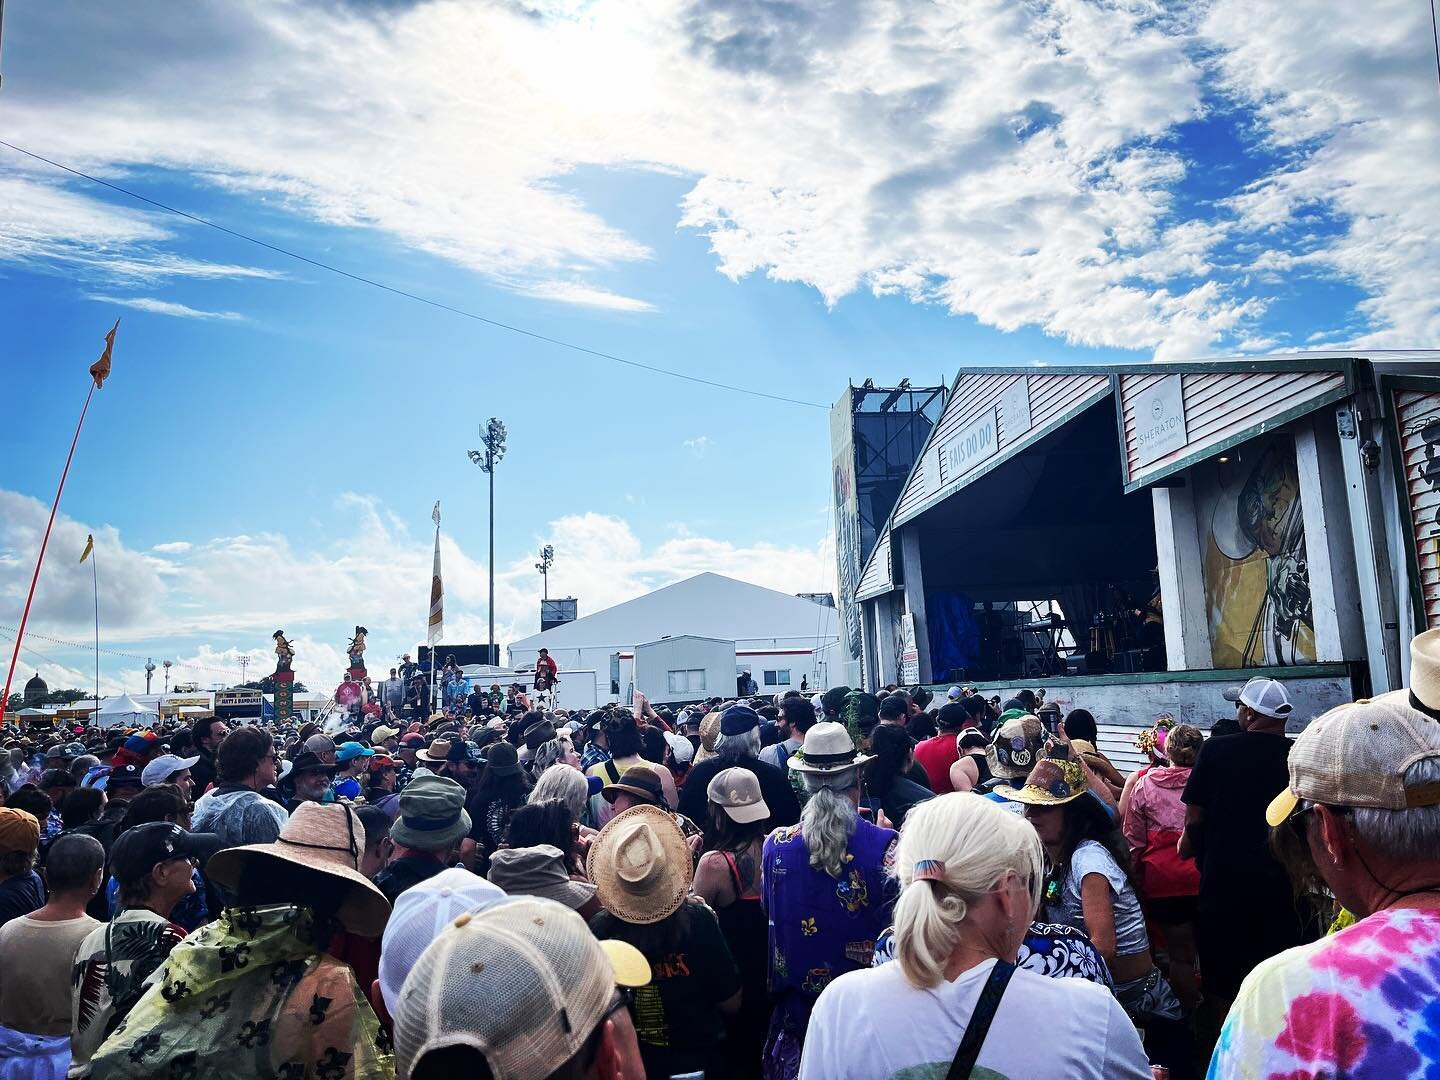 Just a little taste of the fest for your Monday! #jazzfest #nola #lifestyle